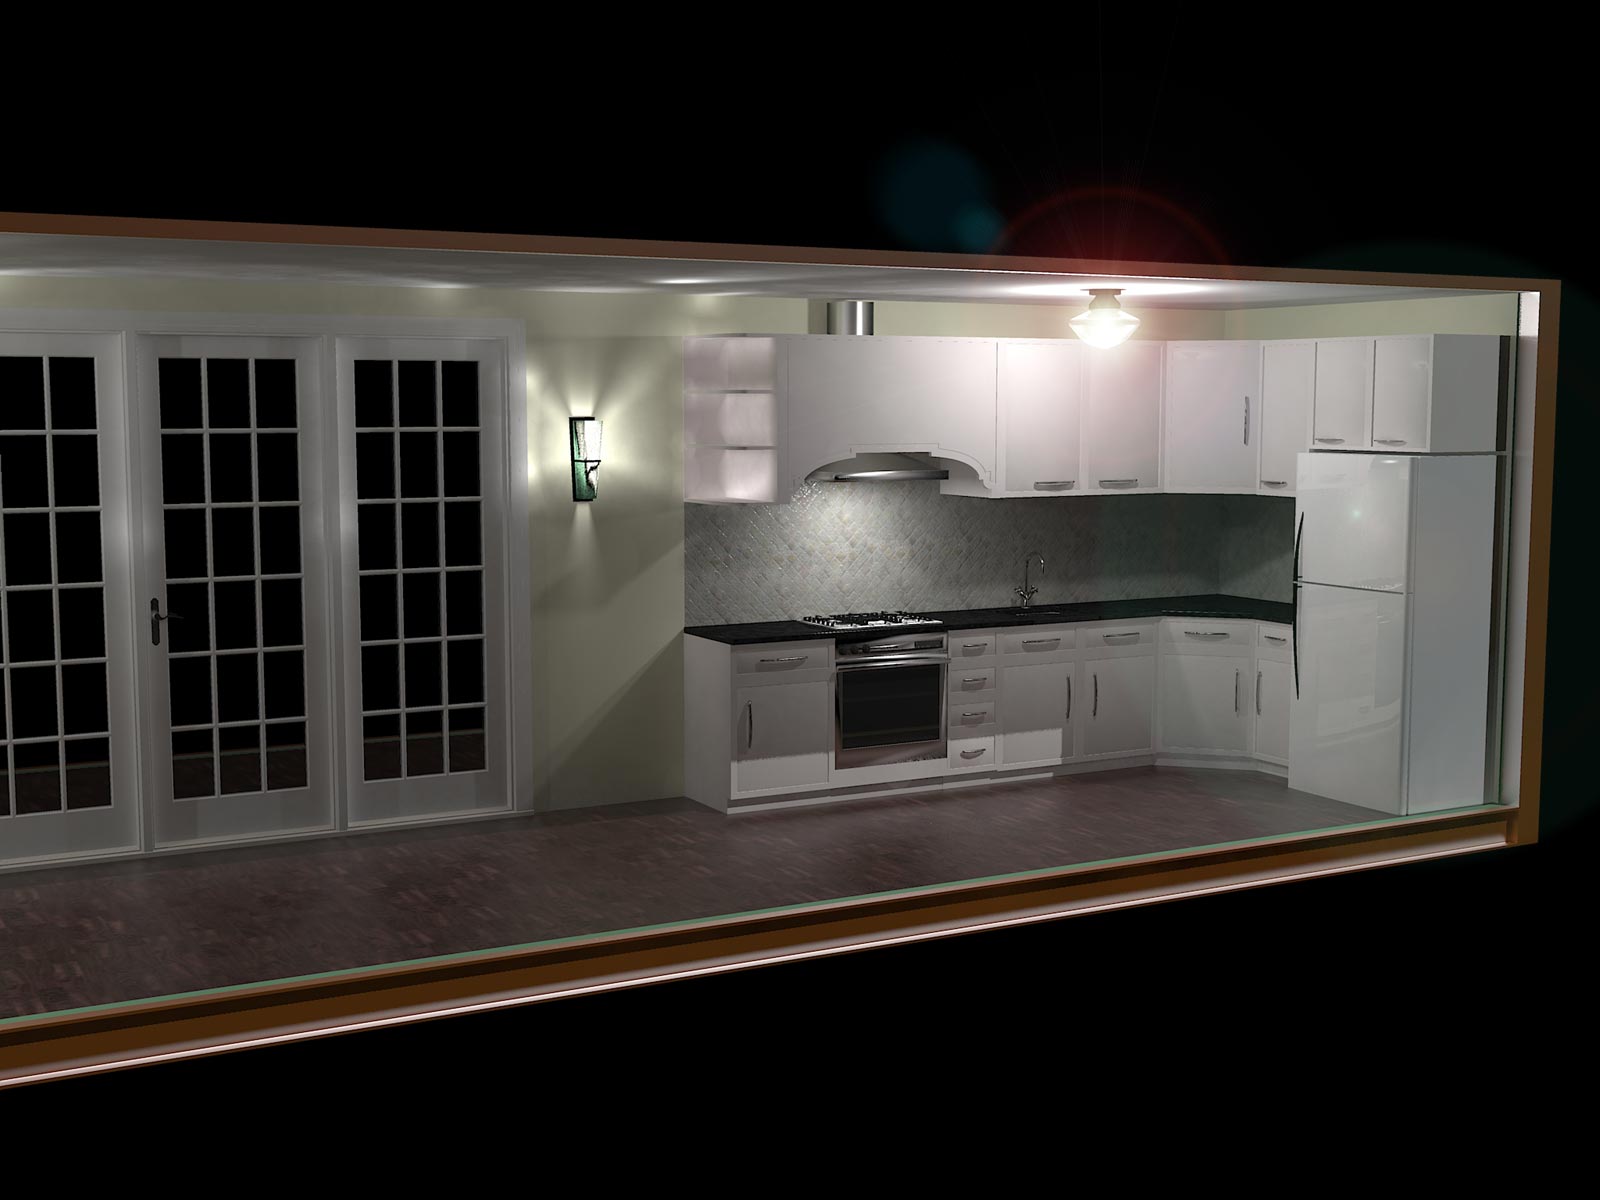 I took this scene in Photoshop and used the magnetic lasso tool around the light fixture glass, did a highlight dodge tool operation and added a lens flare. I think the light coming from the stove canopy should have more of an effect under those cabinets. Not sure how to proceed under there. Thinking a dodge operation. I would also like to add some light switches, outlets and air vents to give more realism.